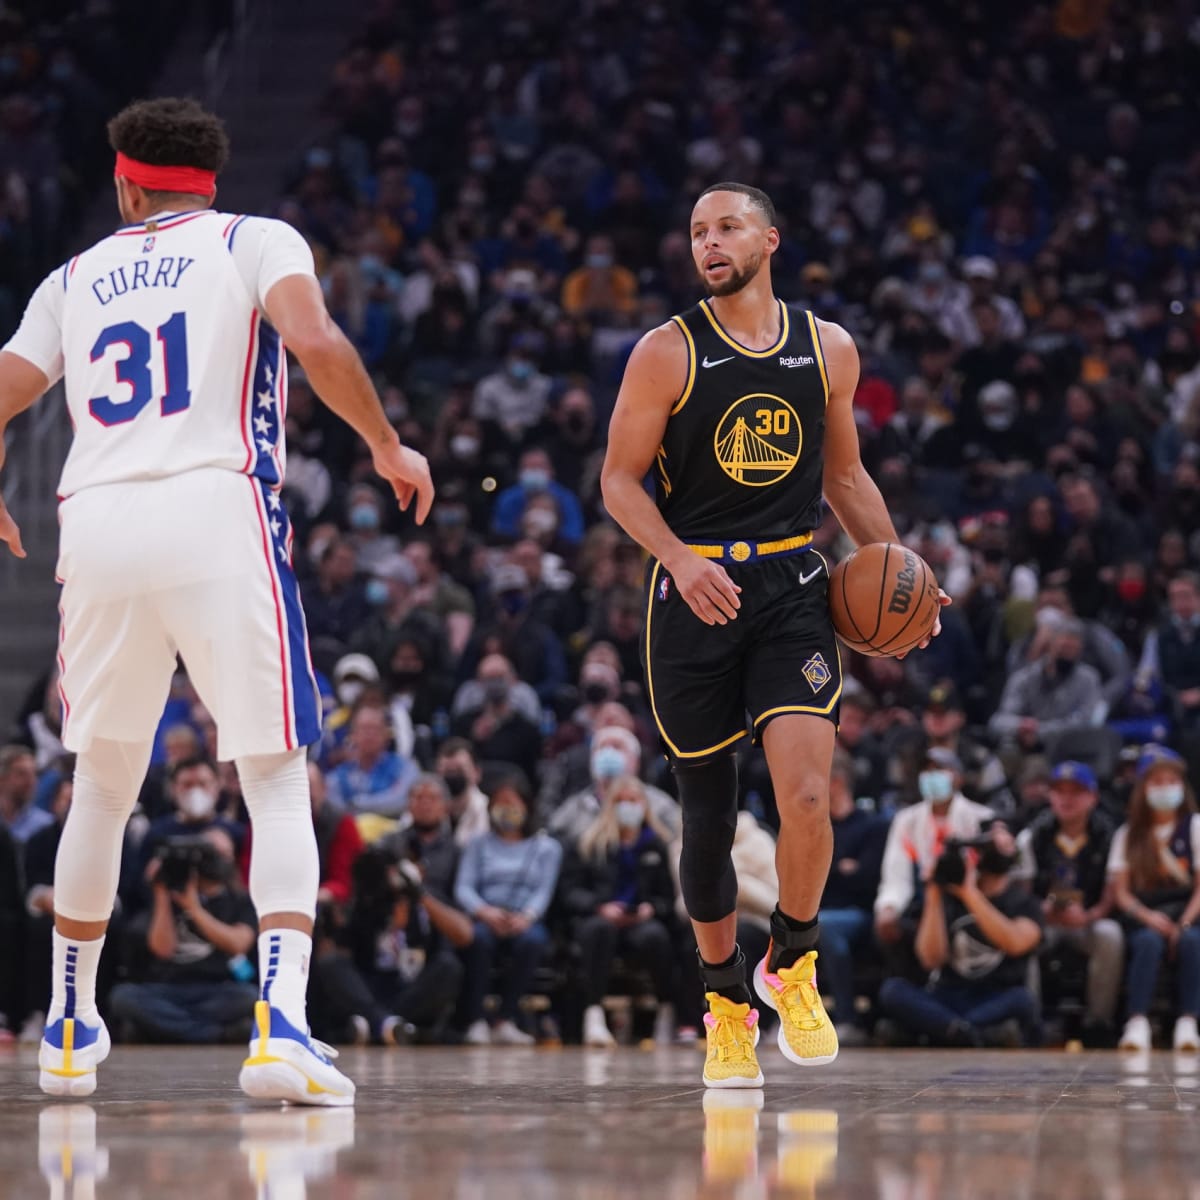 Seth Curry wearing number 3 as he joins his brother on the Warriors : r/nba